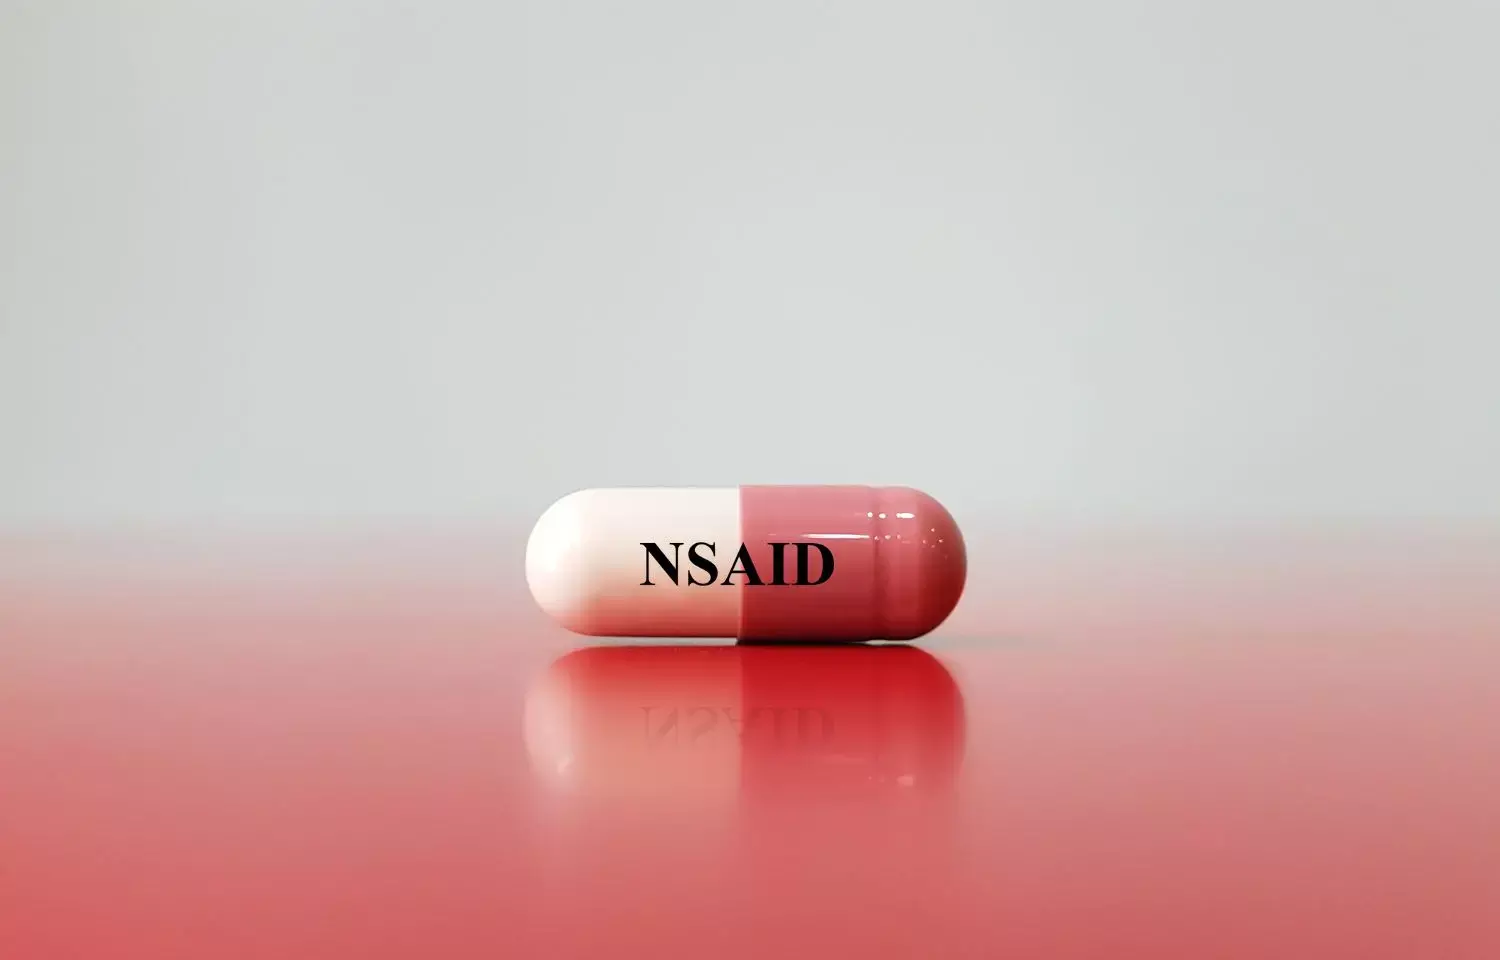 Even short-term use of NSAIDs linked with HF hospitalization in patients with diabetes